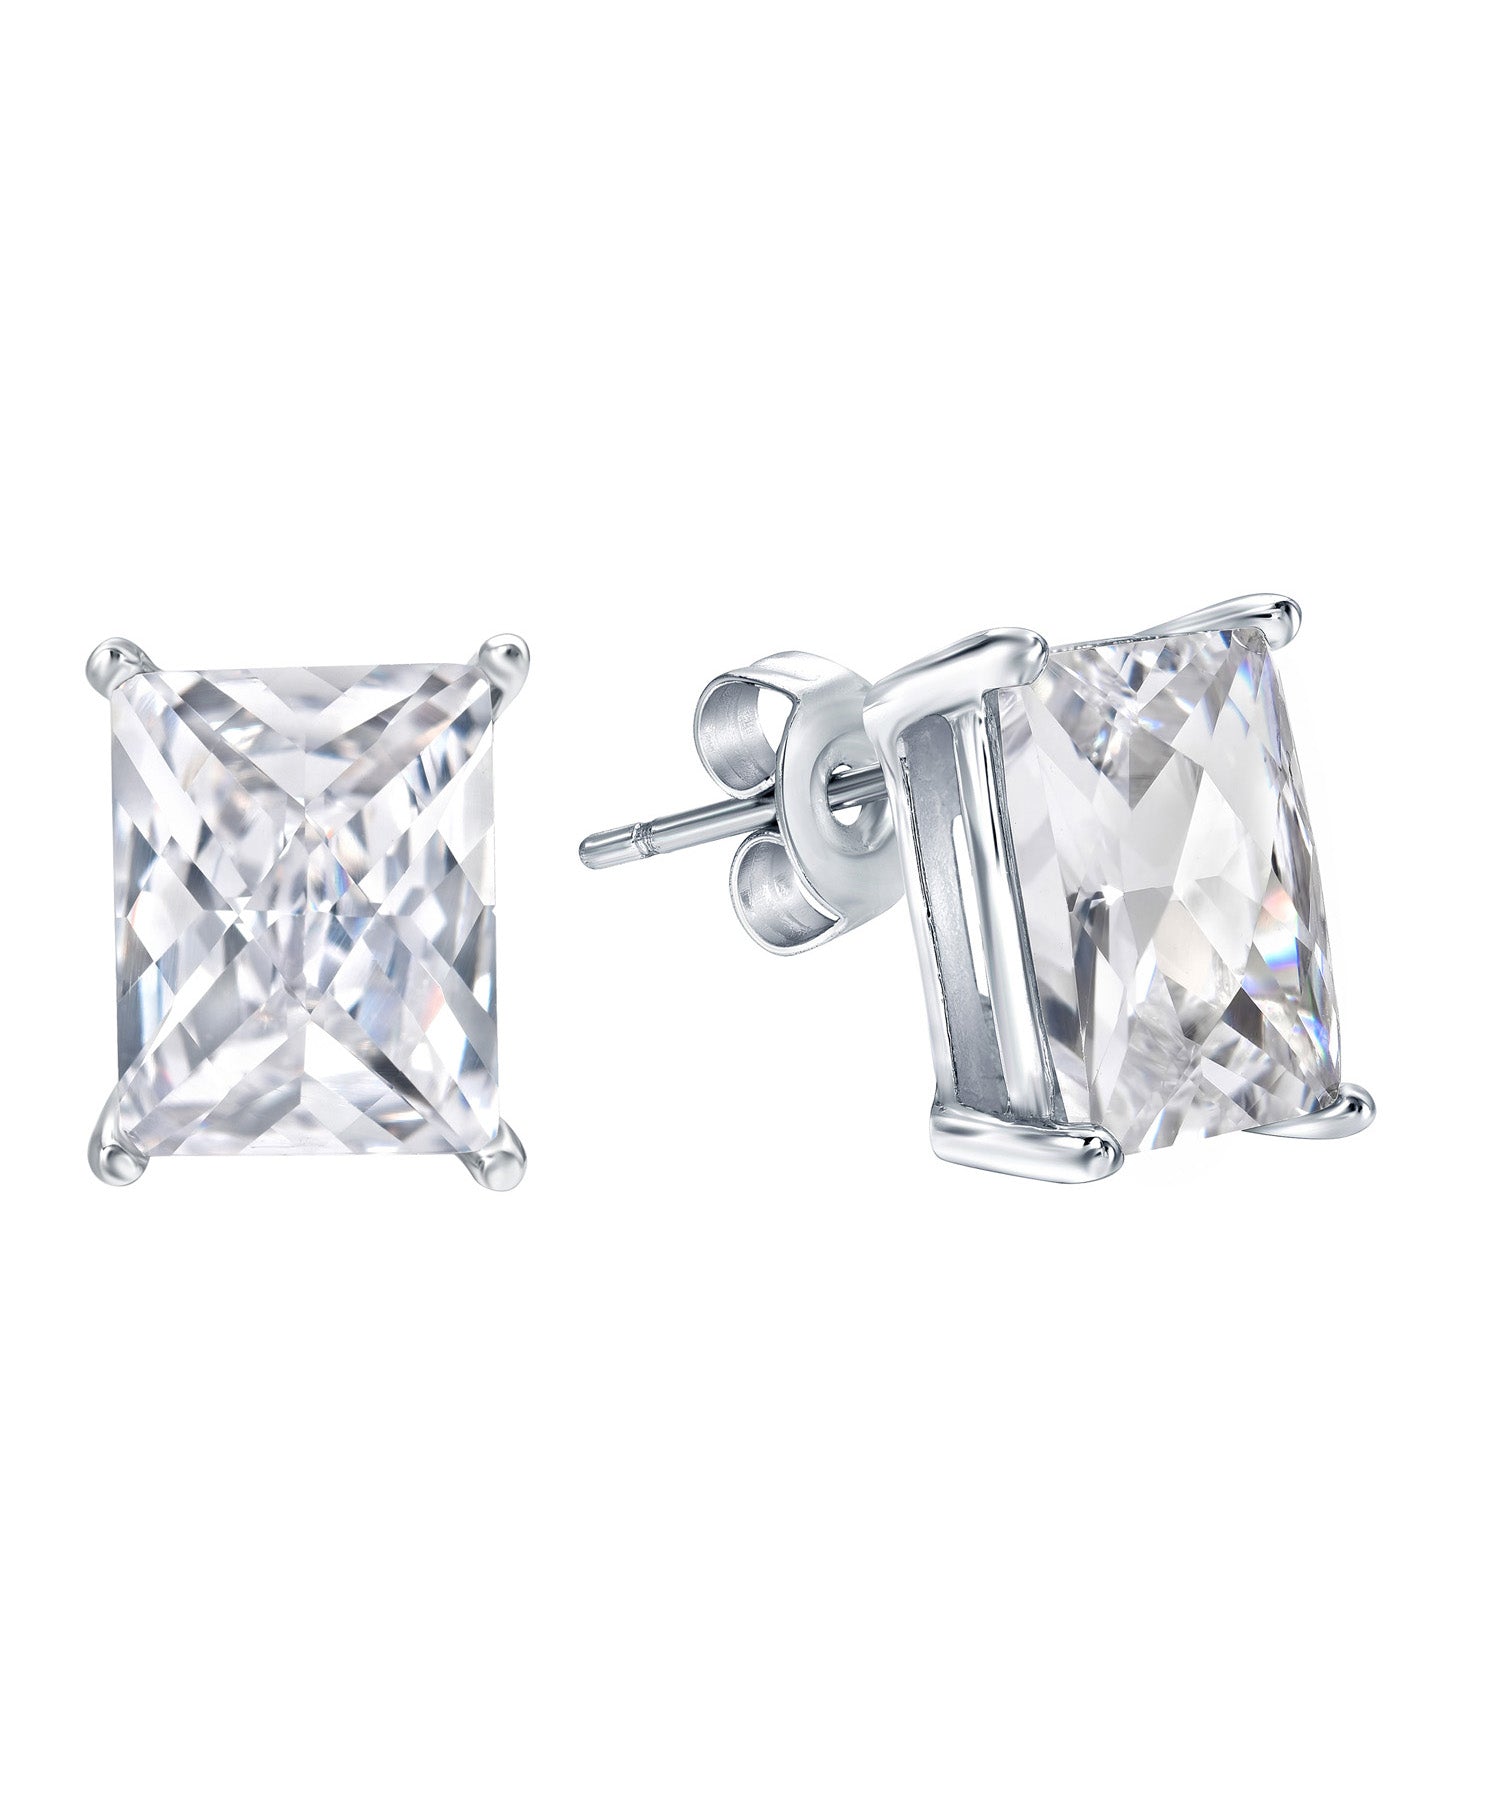 Checkerboard Cut Cubic Zirconia Rhodium Plated 925 Sterling Silver Stud Earrings View 2